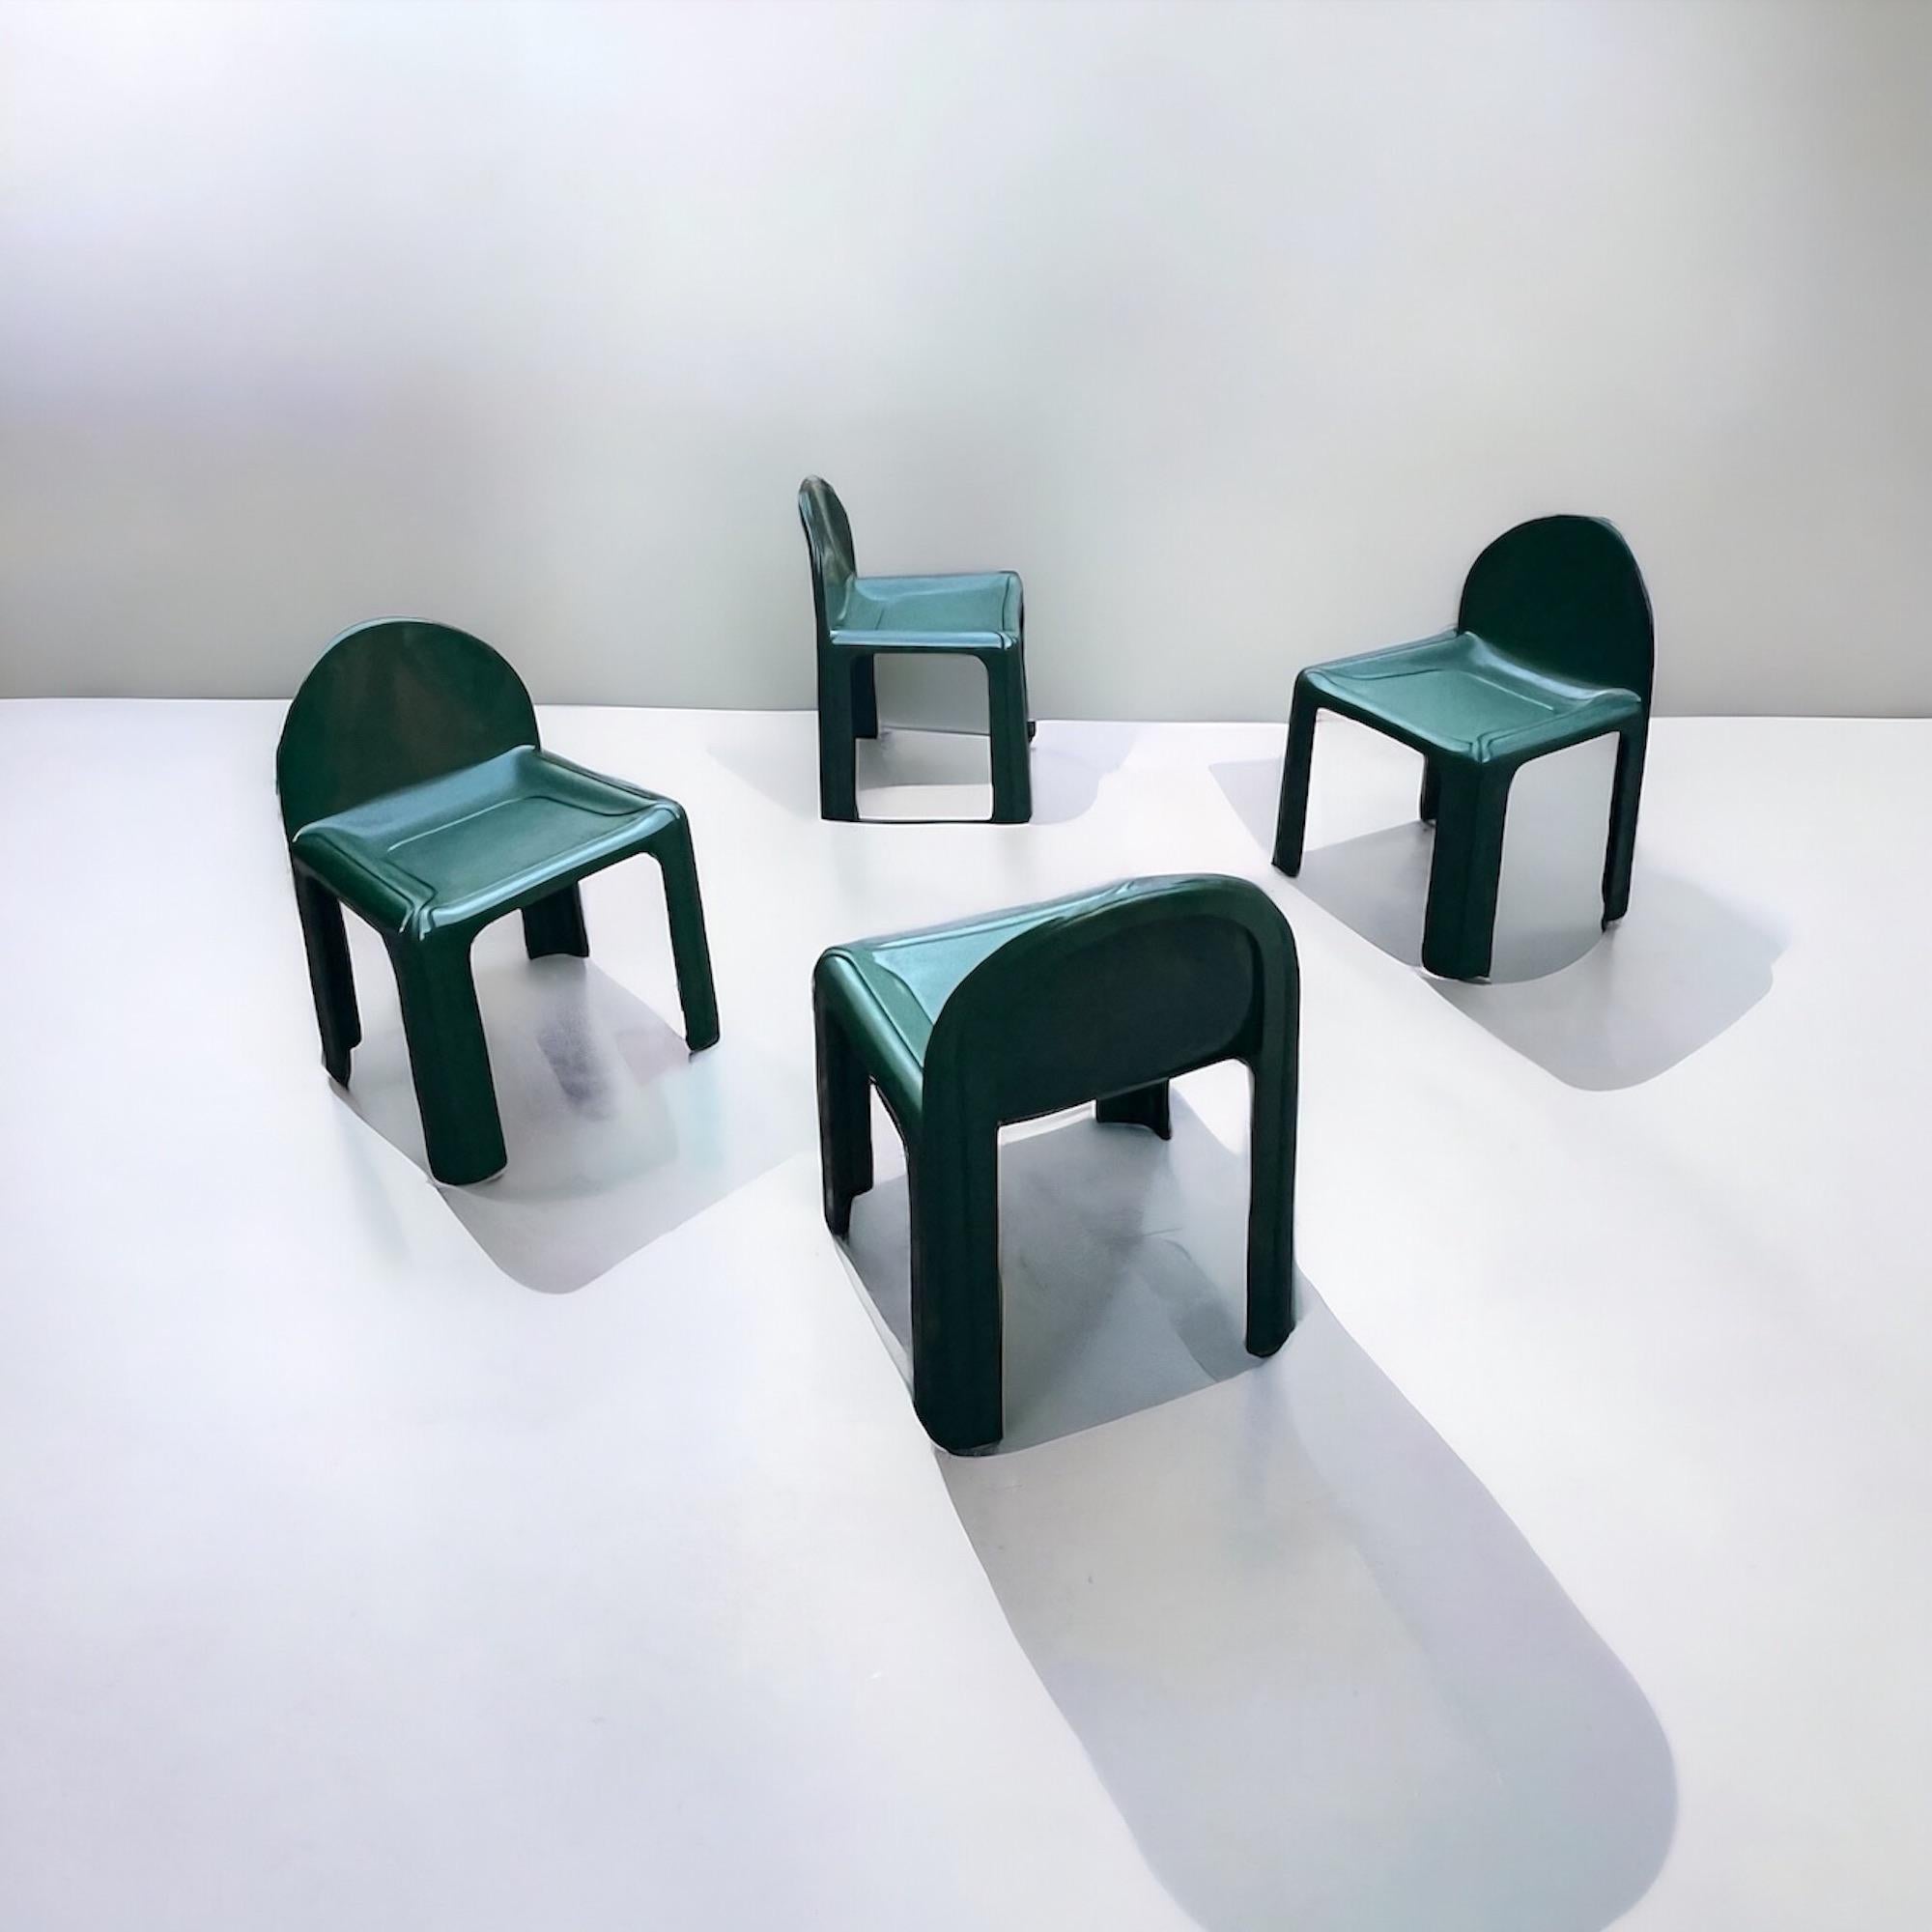 Kartell Model 4854 Chairs by Gae Aulenti, 1960s - Set of 4 - Emerald Green Resin 4